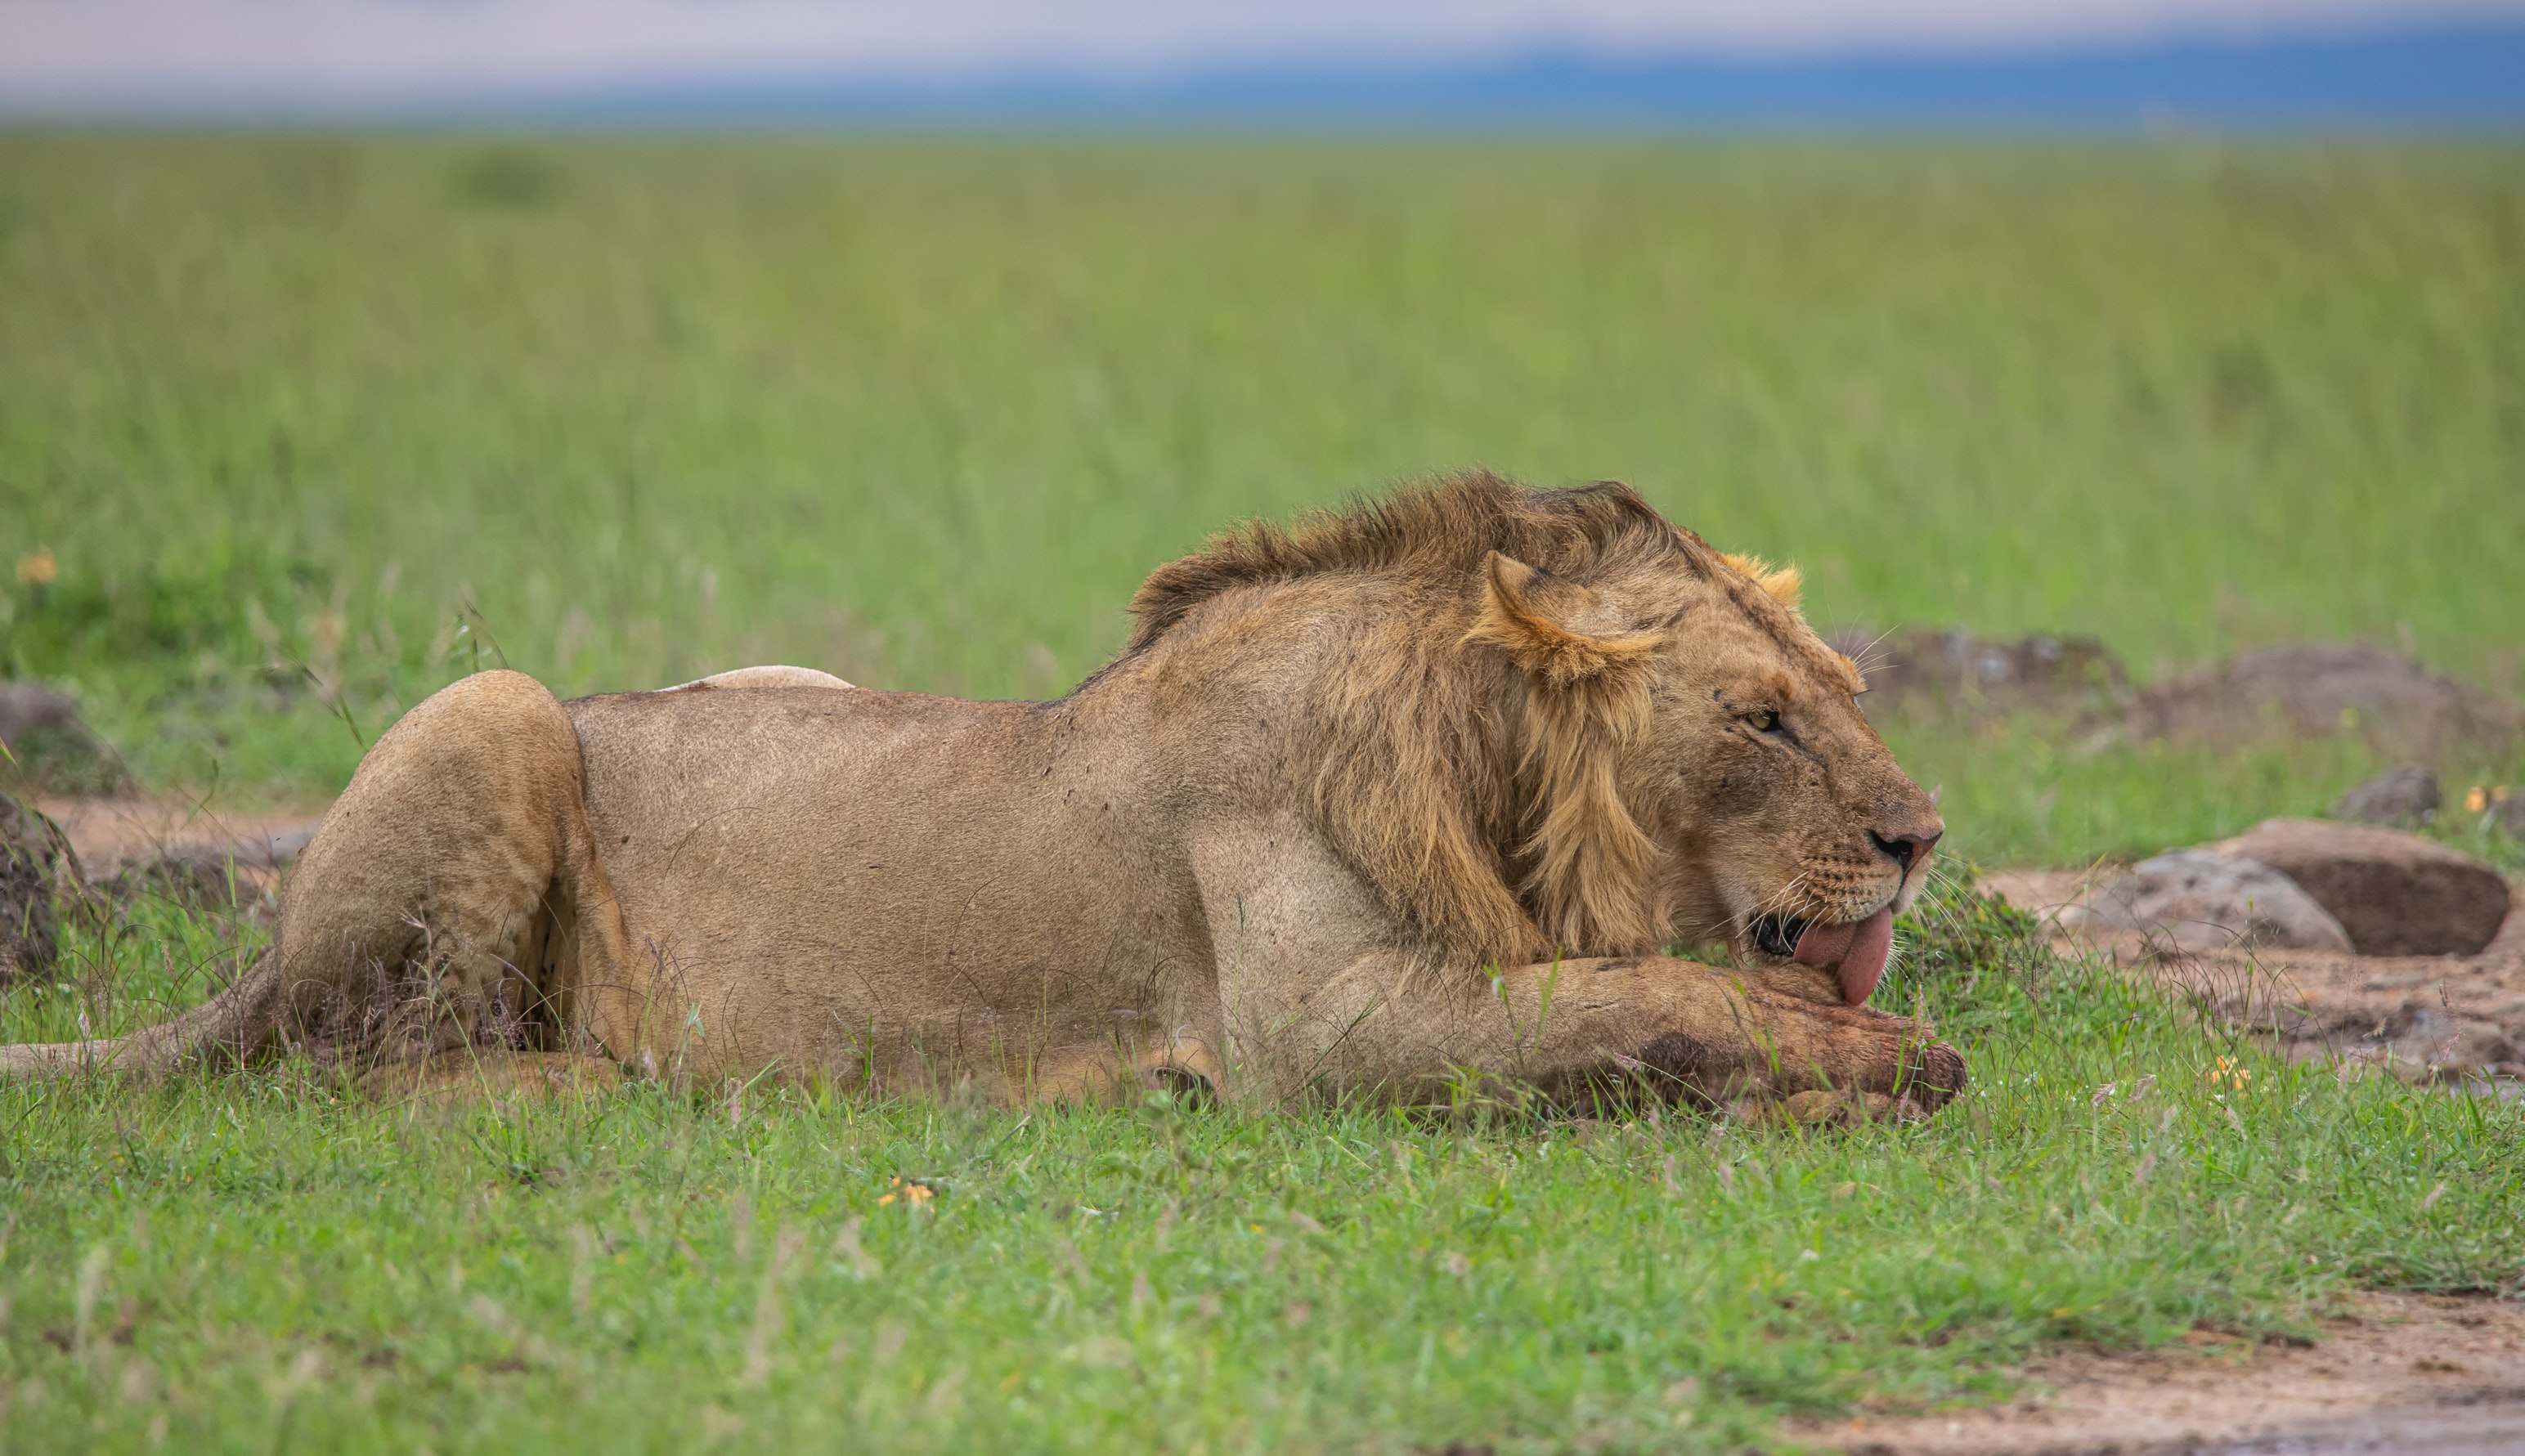 A lion lying down licking its foot in Africa